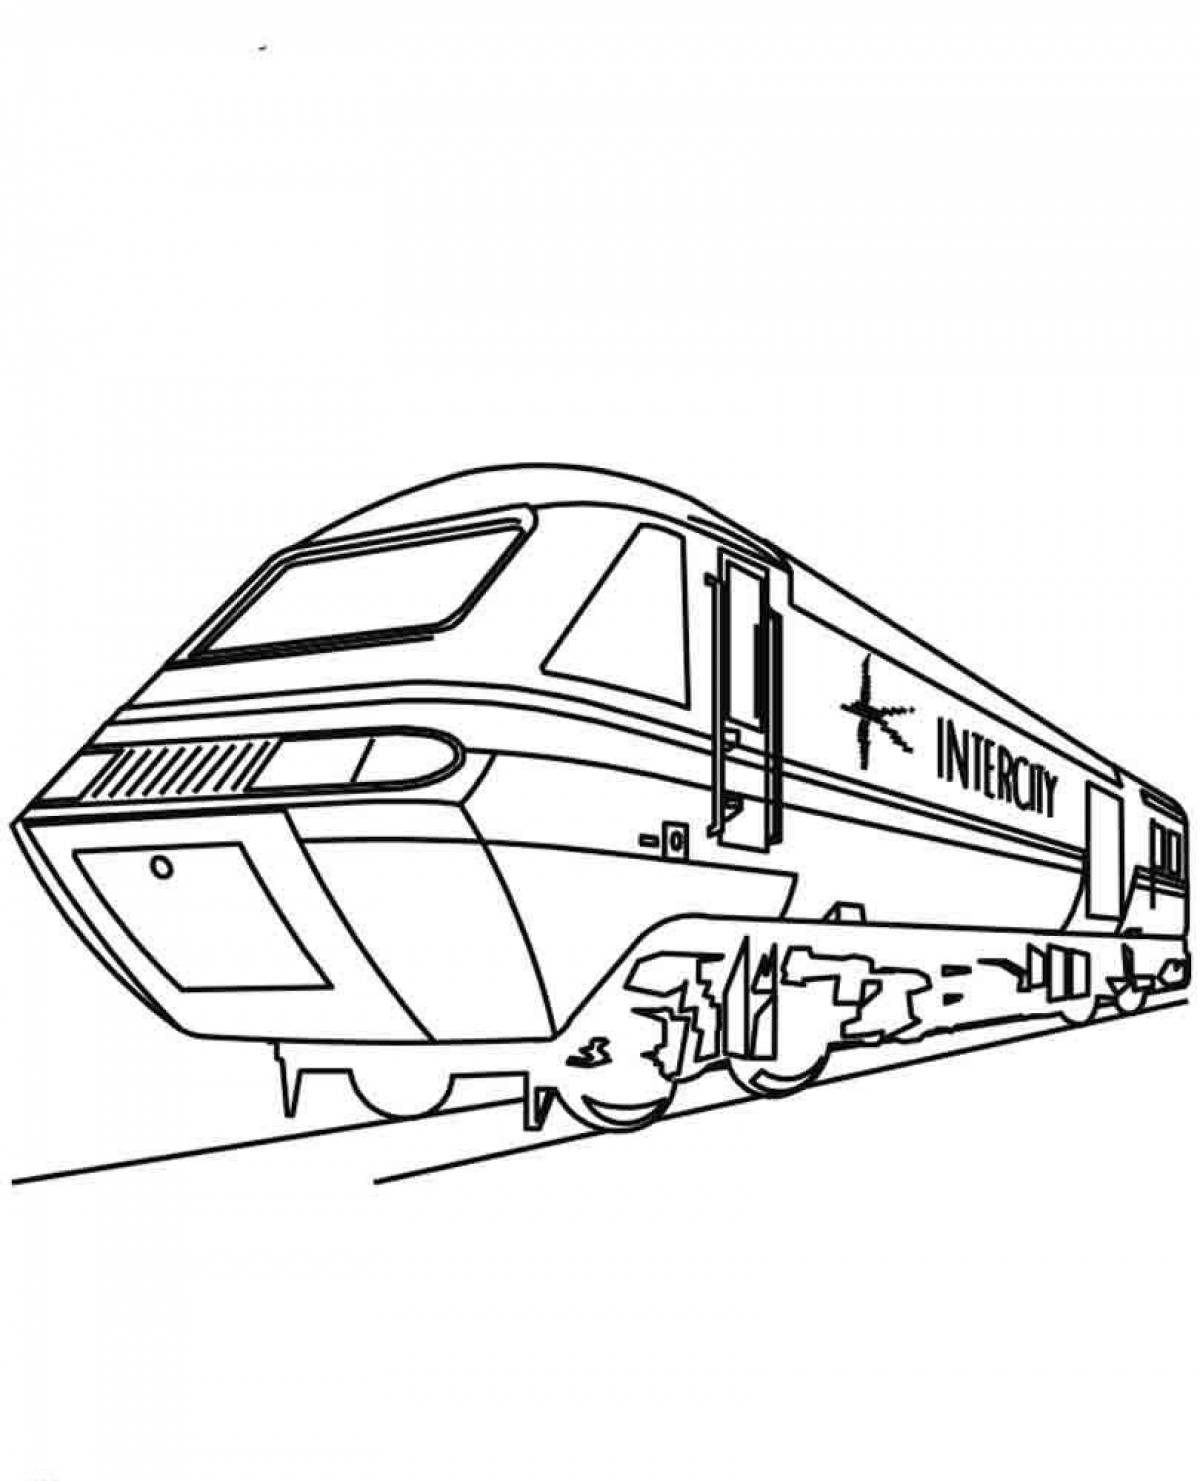 Exciting coloring of the electric train